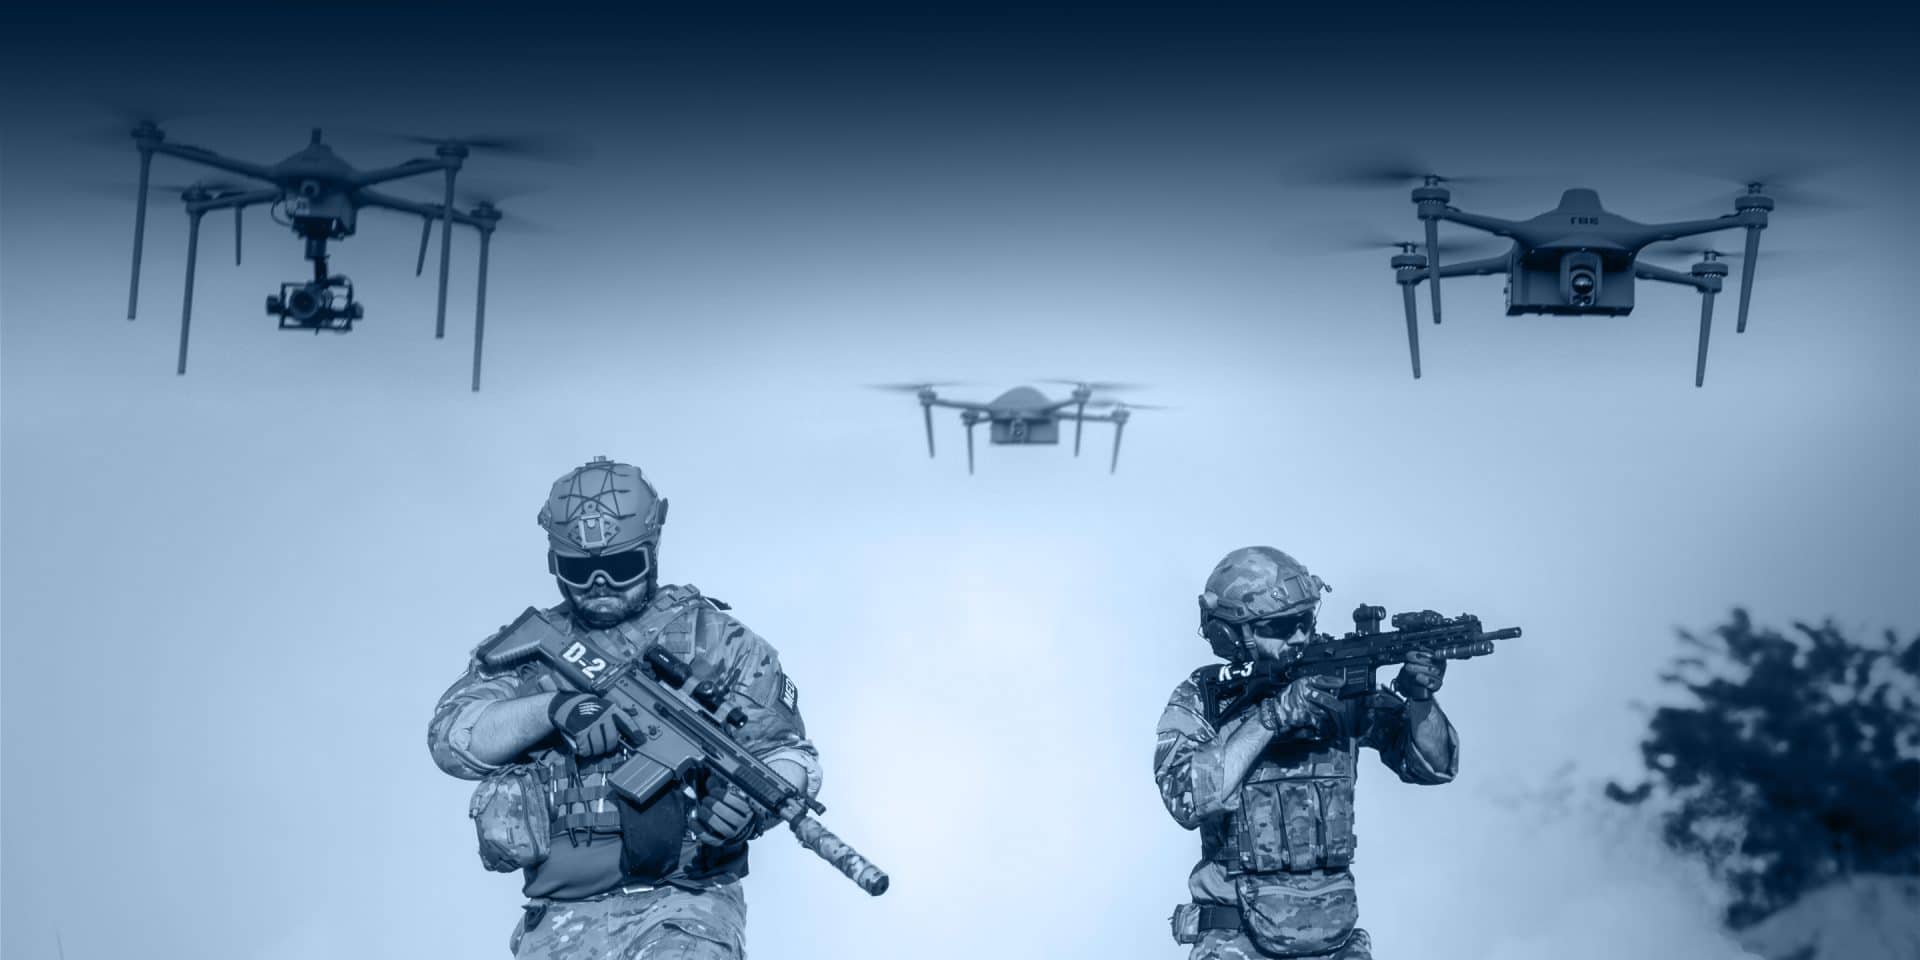 ISTAR Military Drones